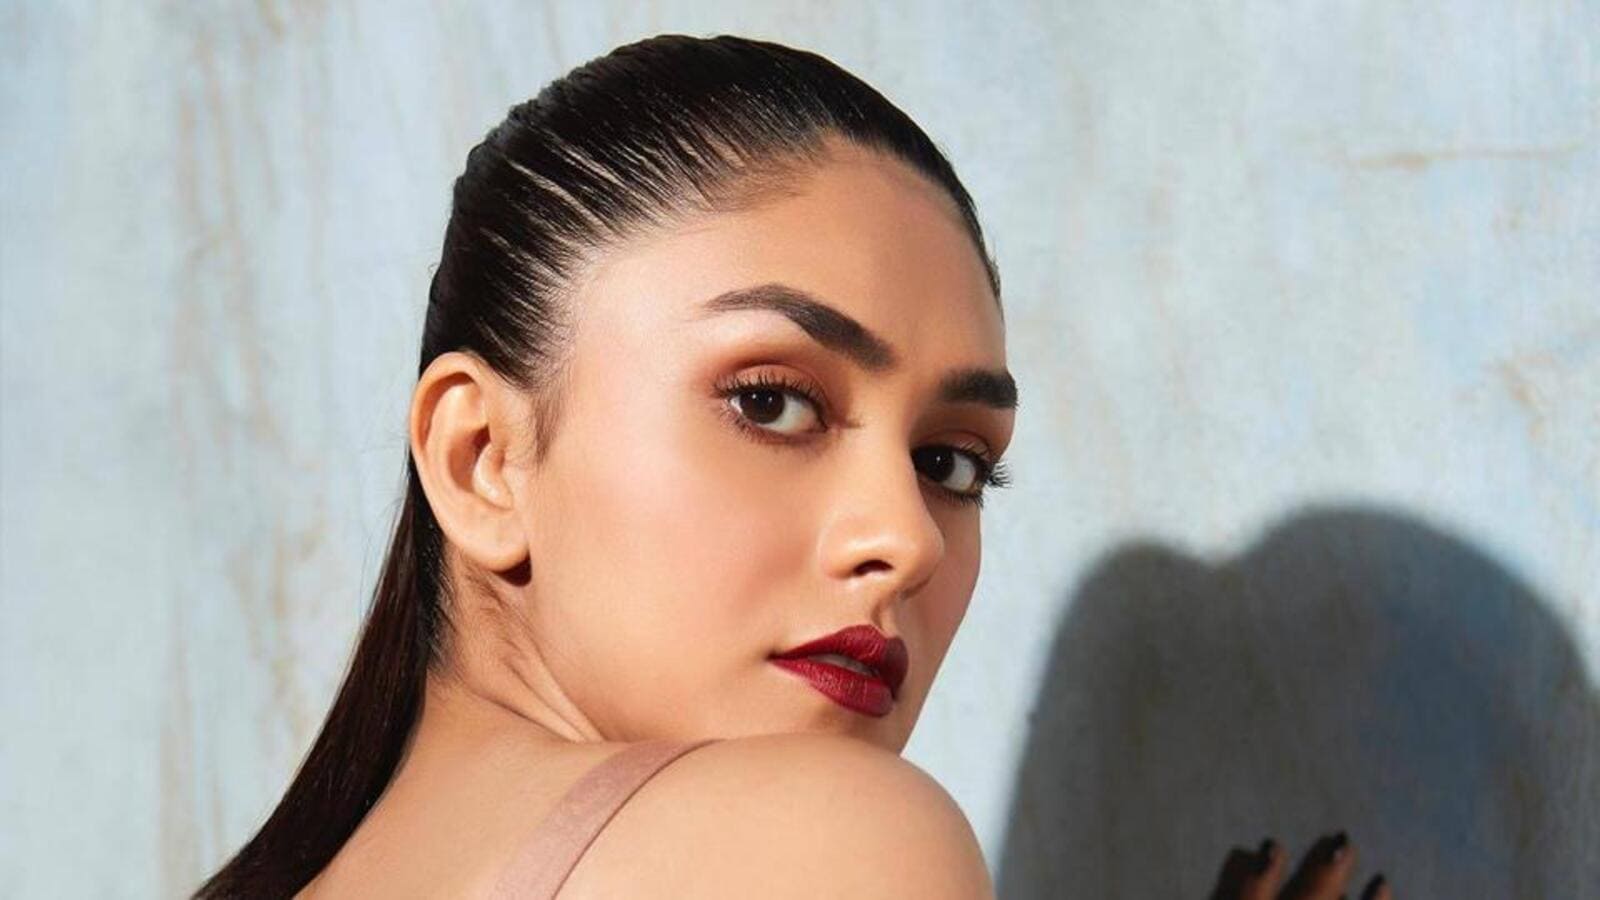 Mrunal Thakur after 10 years as an actor: I stopped acting at some point